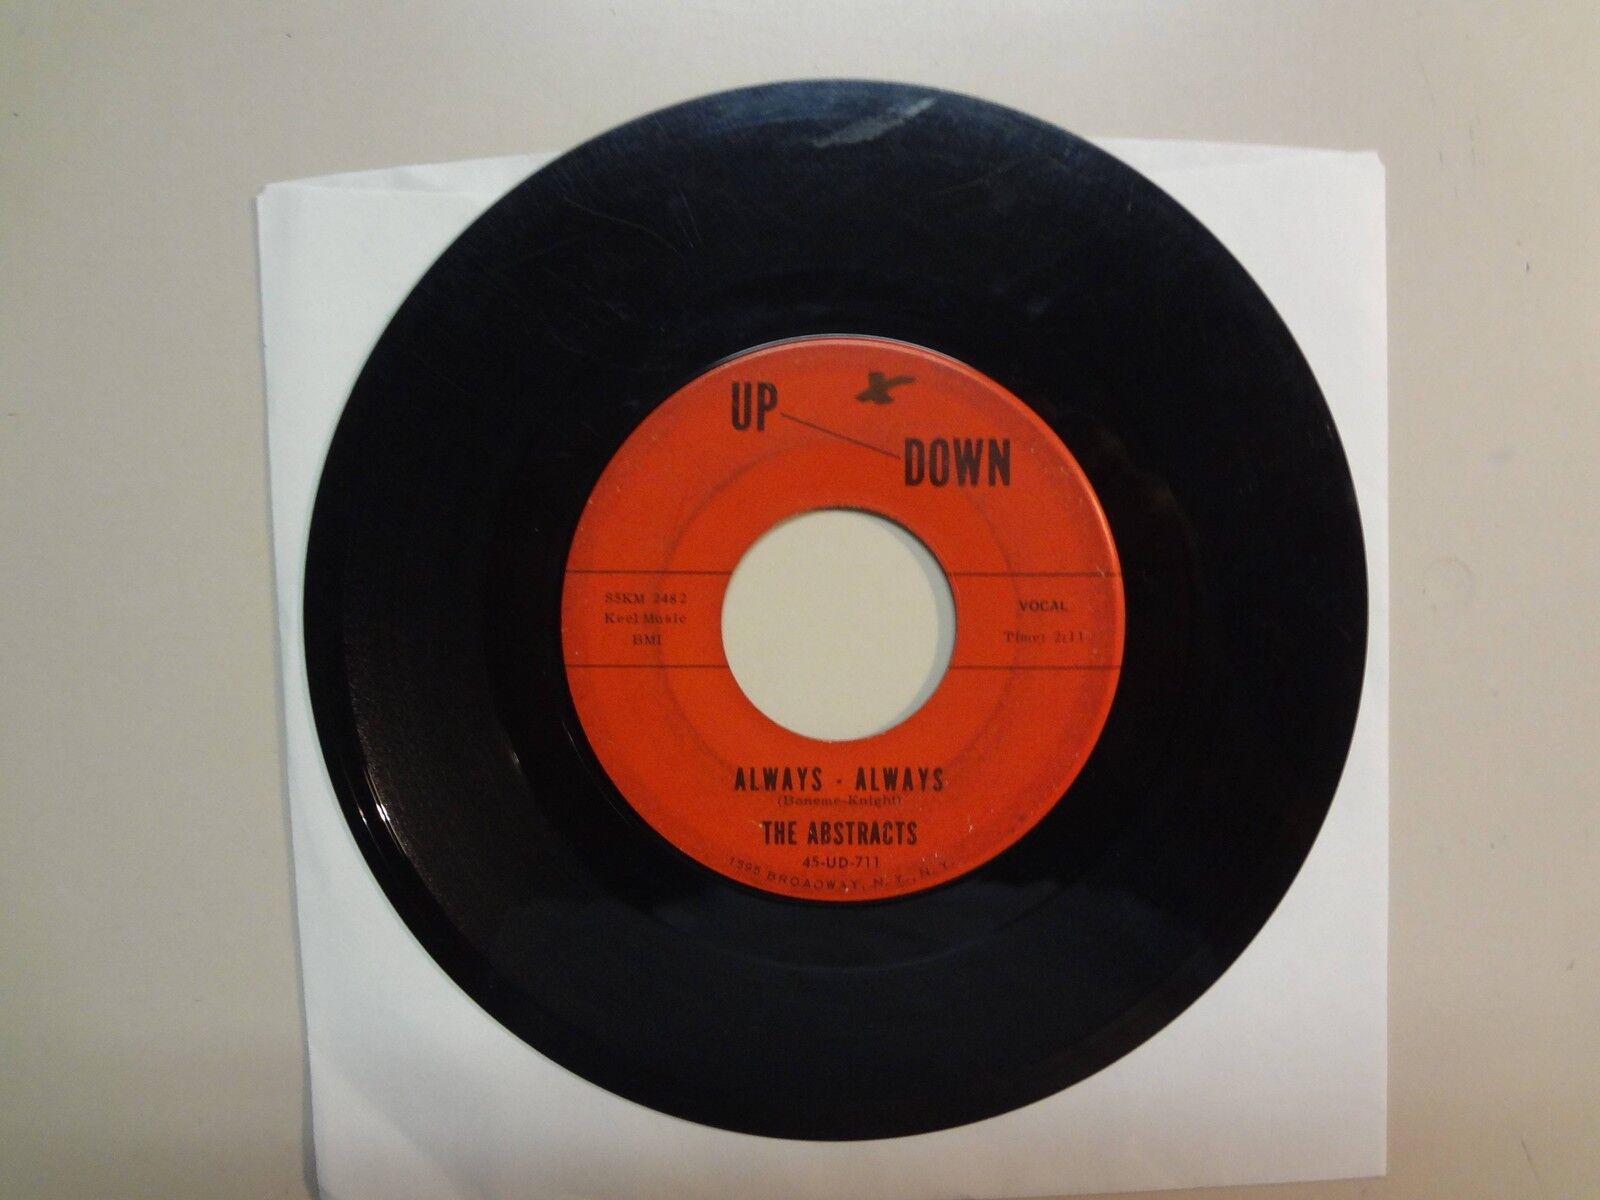 ABSTRACTS: Baton Girl 2:40- Always-Always 2:11-U.S. 7" 9-1965 Up-Down 45-UD-711